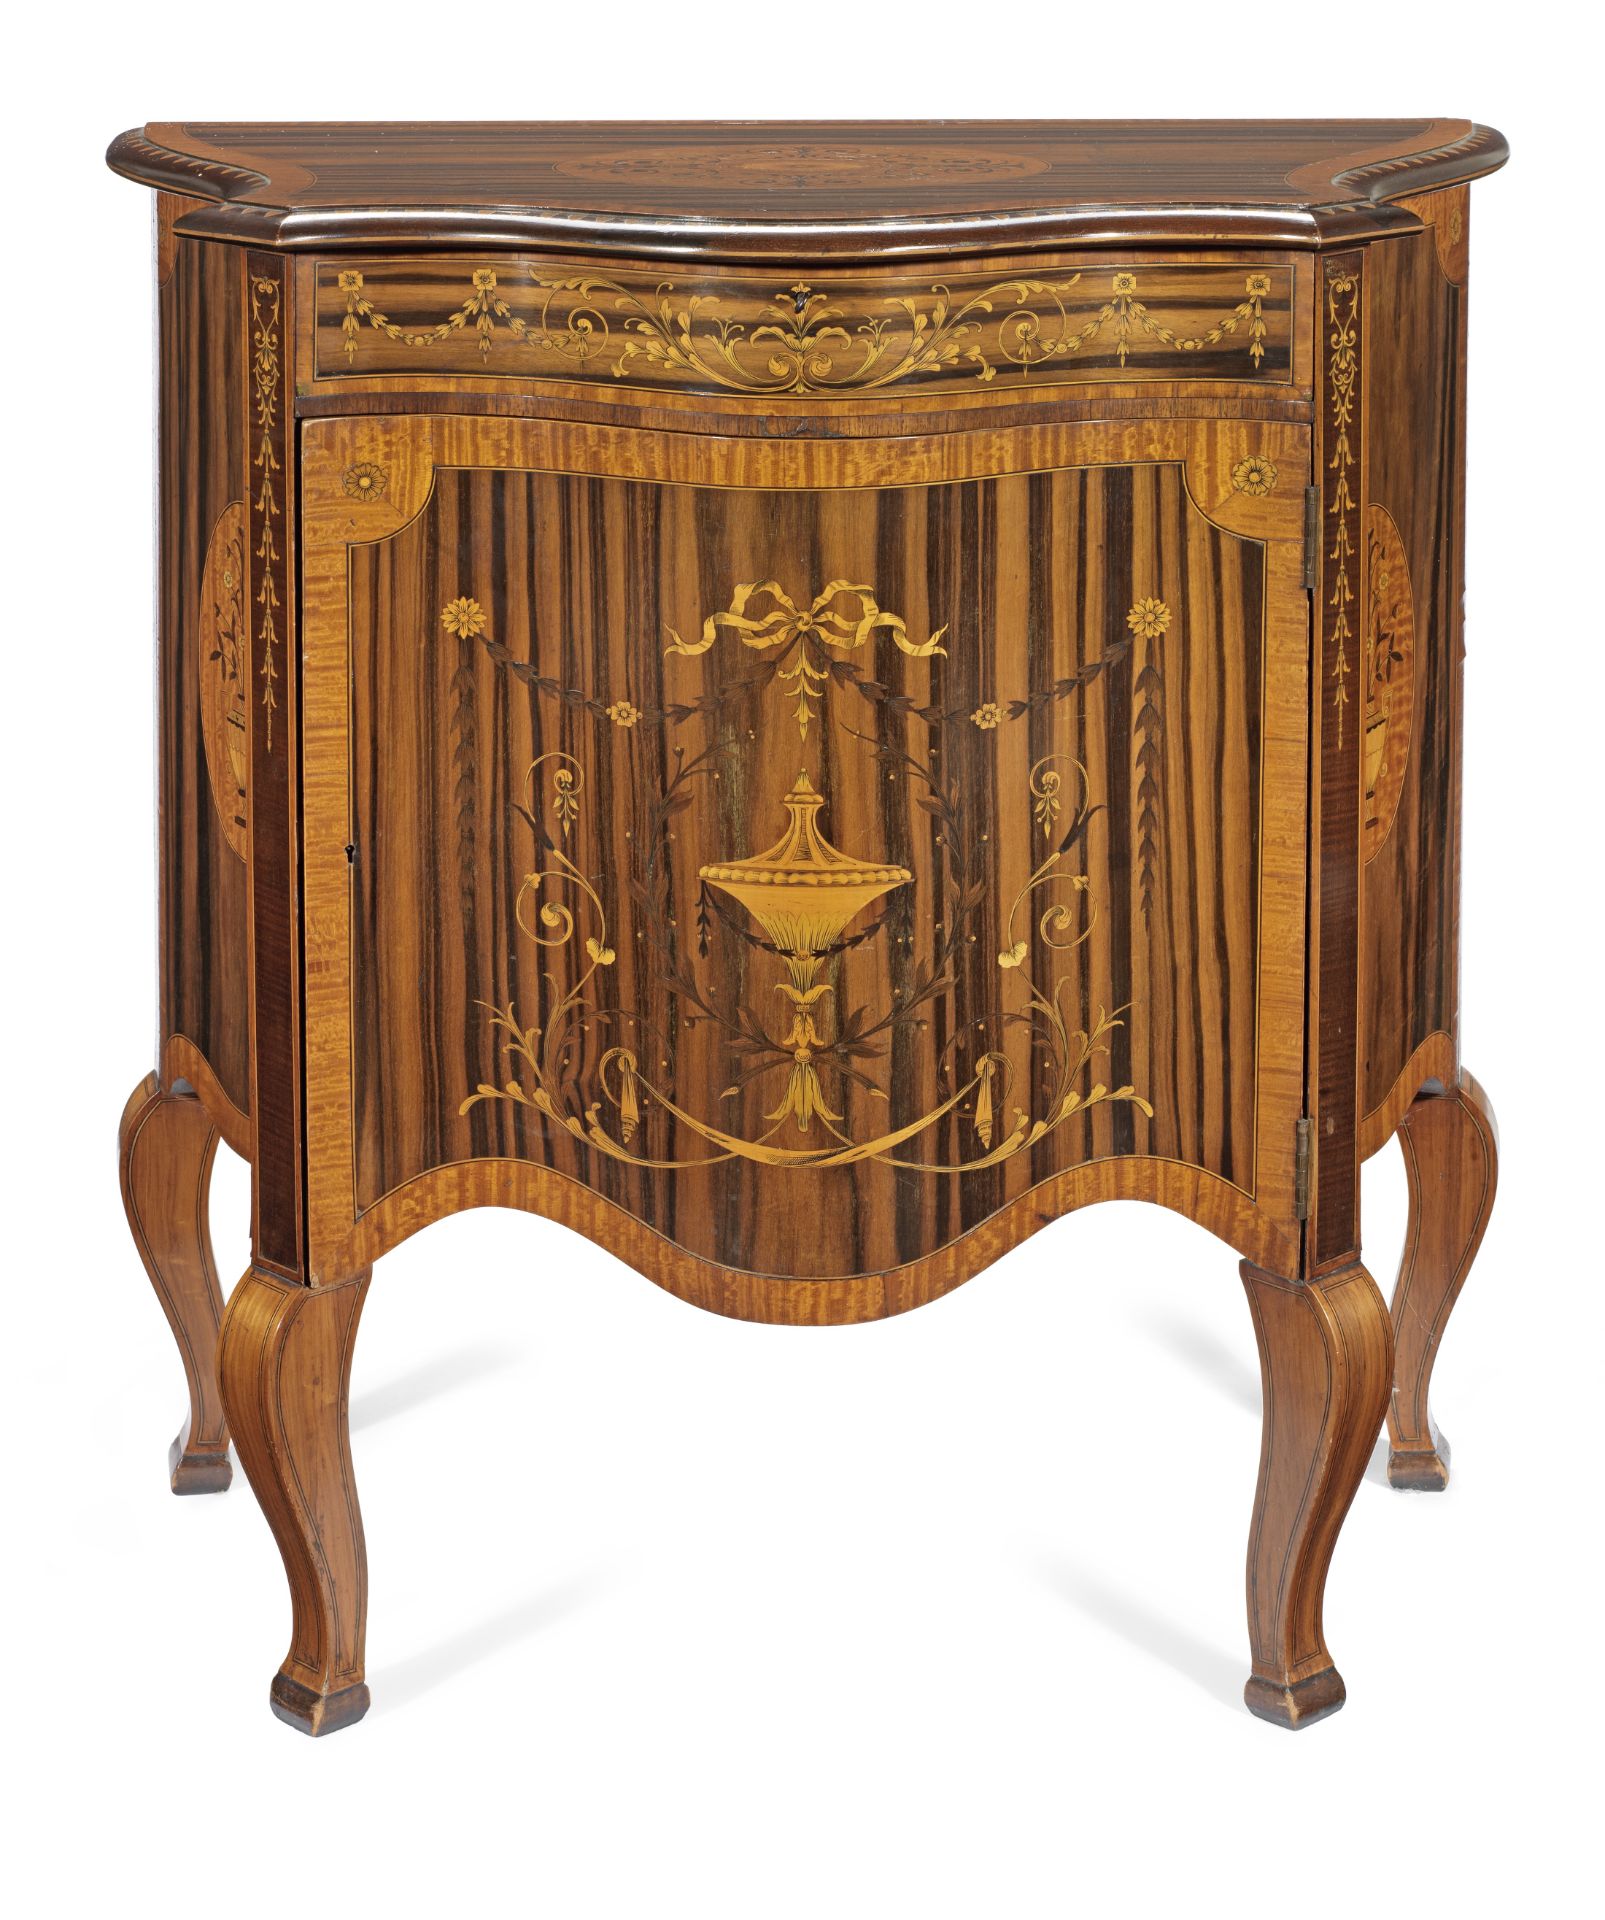 A late Victorian zebrawood, satinwood, purplewood and marquetry serpentine commode